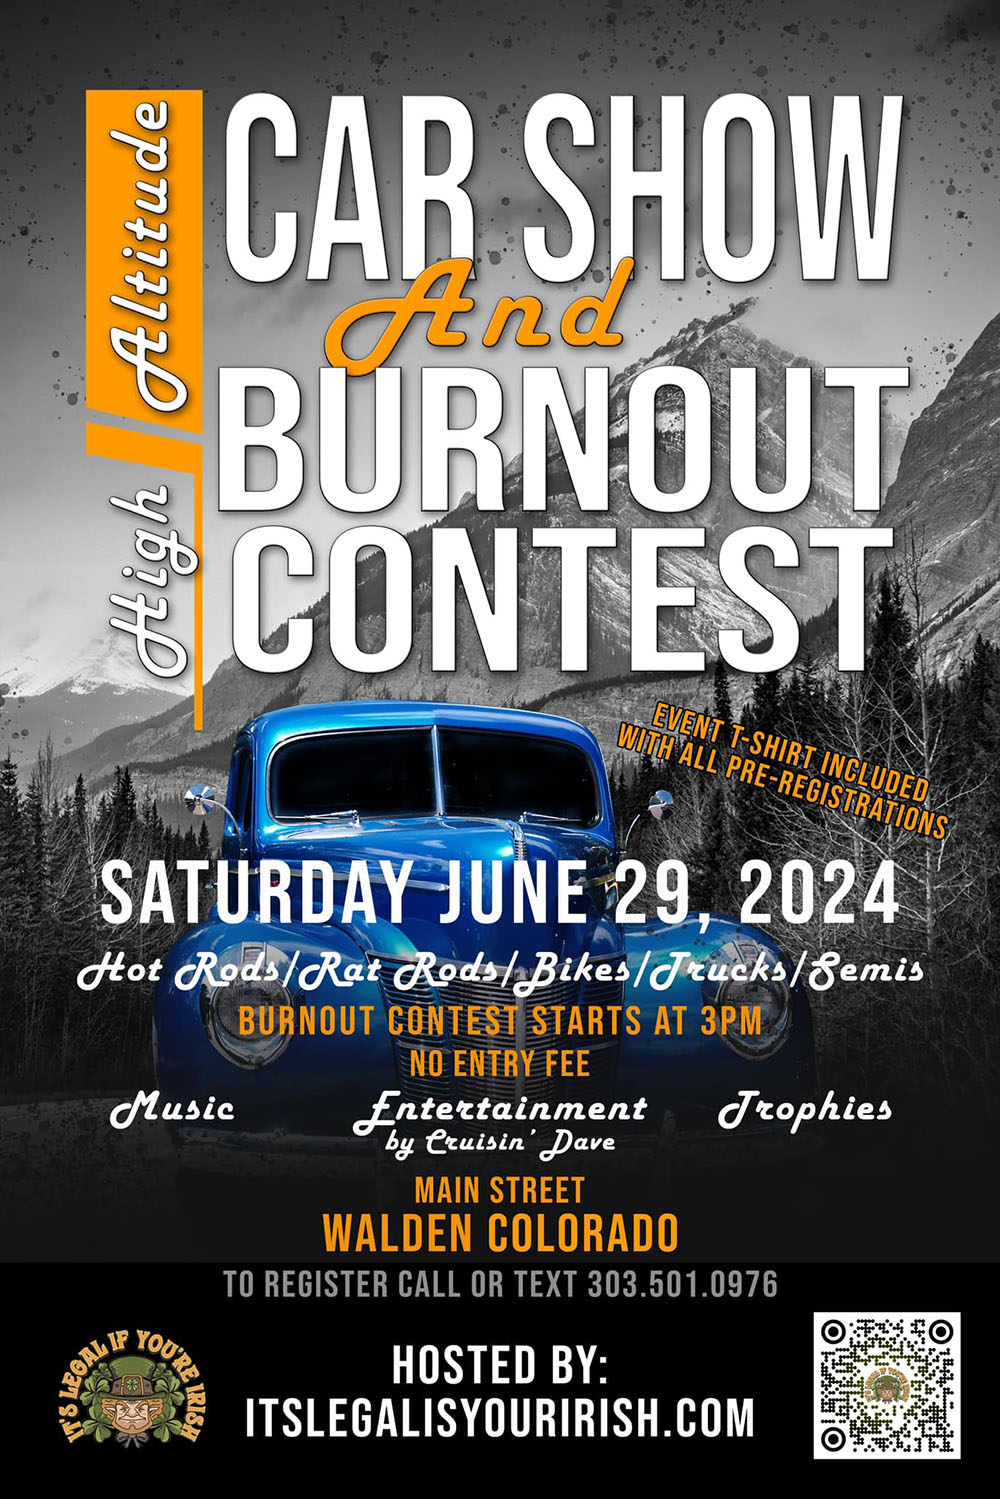 High Altitude Car Show and Burnout Contest 2024 - Walden, Colorado @ Main Street - Walden, Colorado | Walden | Colorado | United States